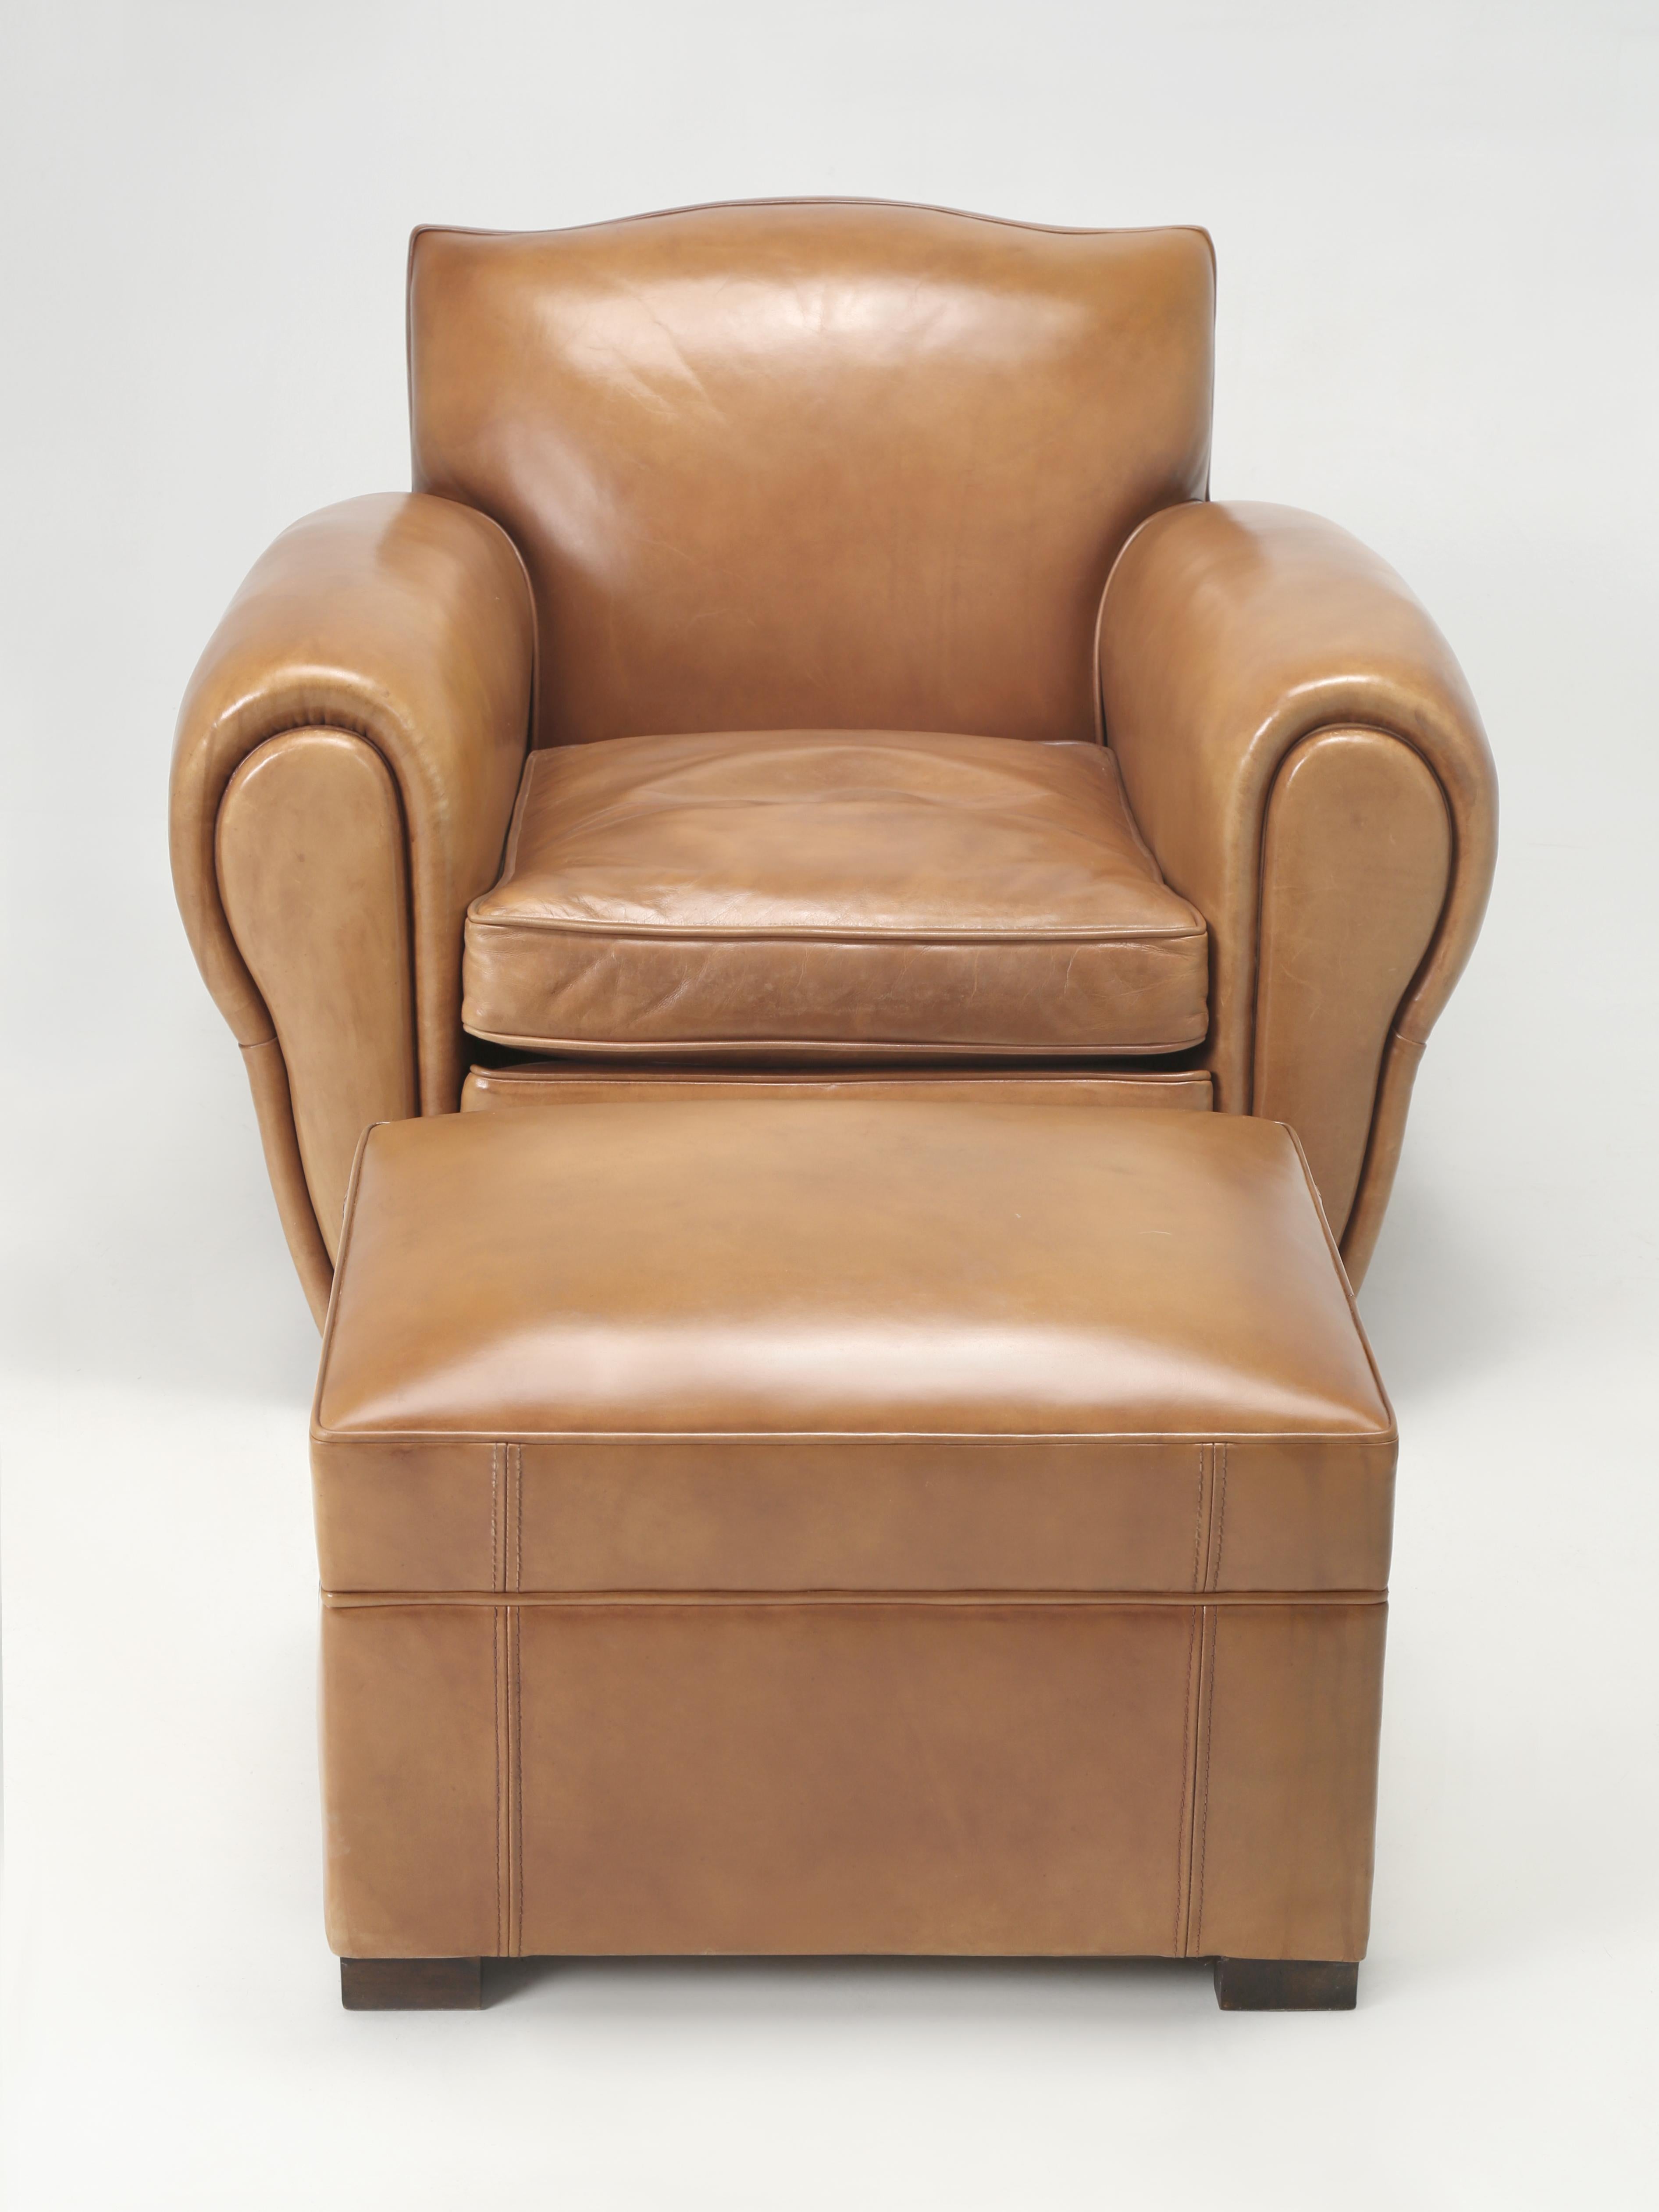 Our French inspired Leather Club Chair with matching Leather Ottoman was not made in France, but rather Hong Kong and was crafted with a traditional solid wood frame, hand-tied conical springs on jute webbing. The Leather for our Club Chair was